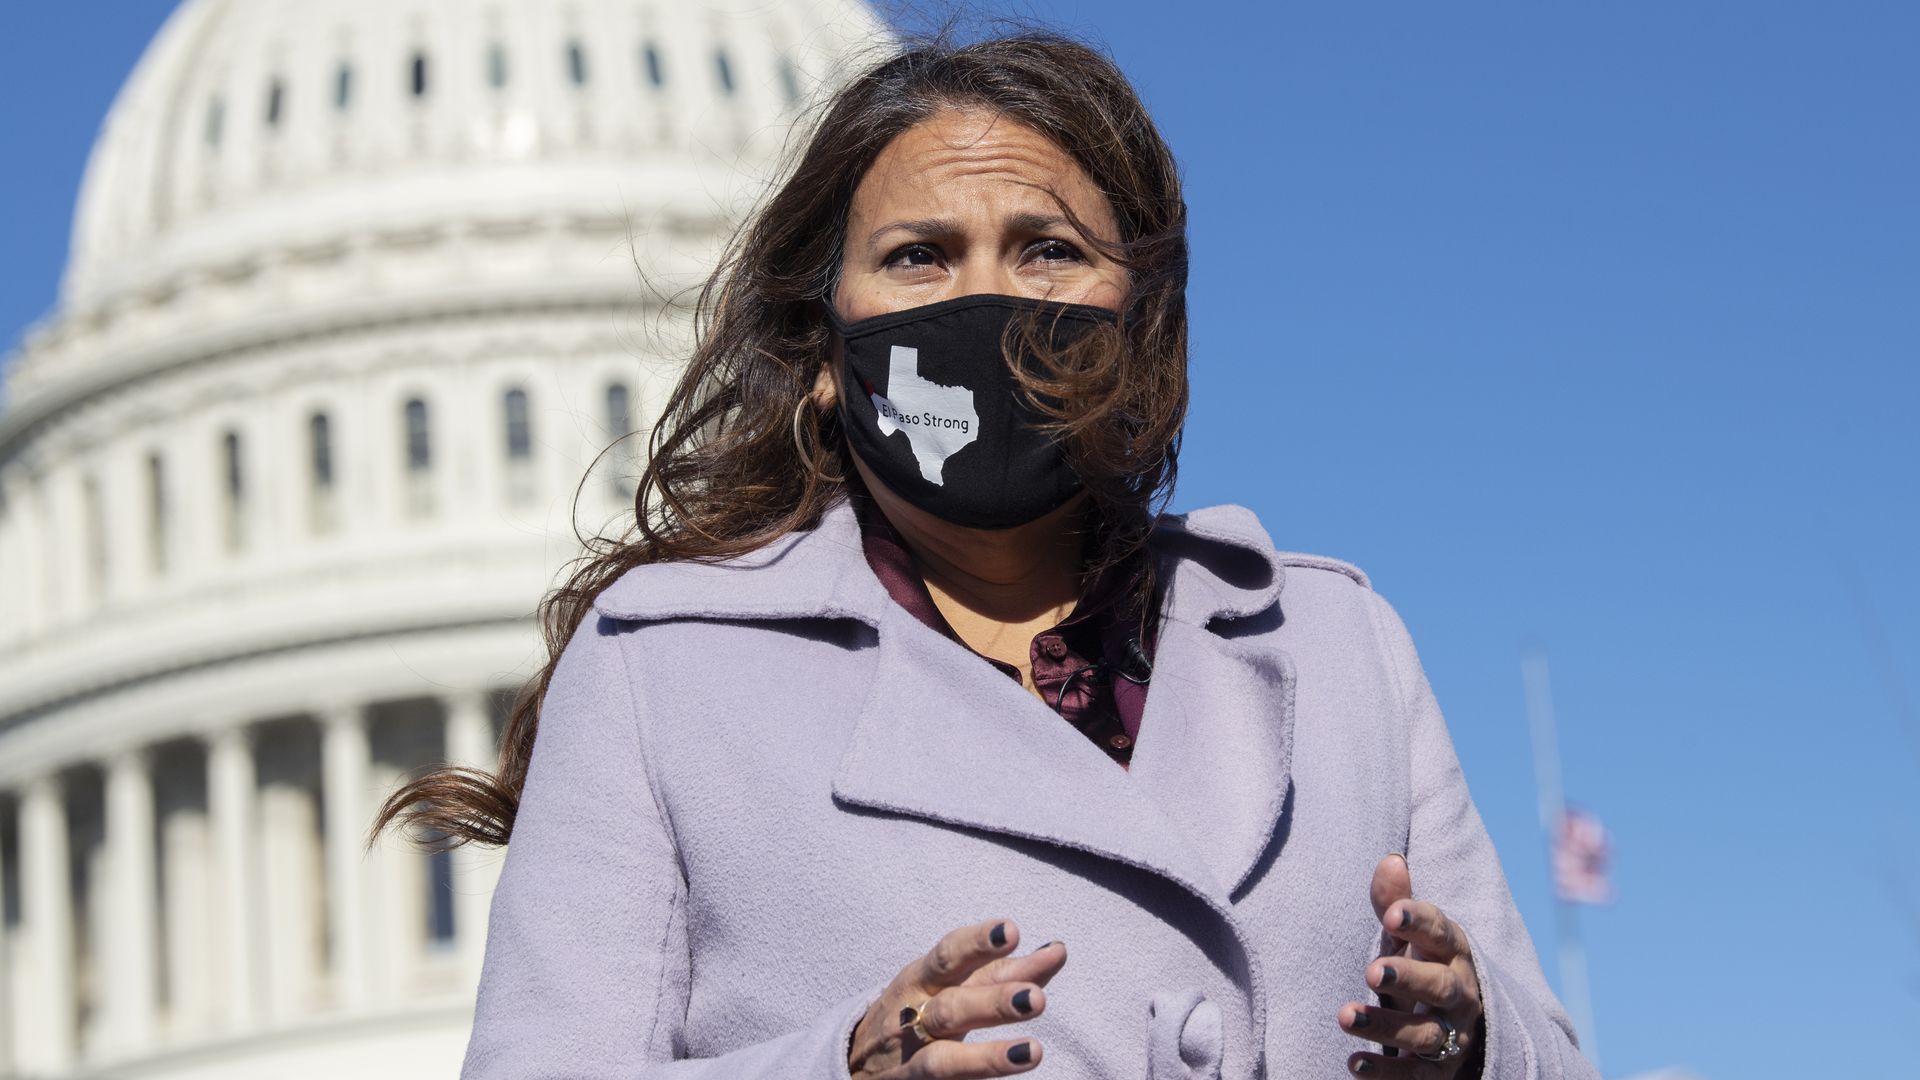 Rep. Veronica Escobar is seen speaking outside the U.S. Capitol.